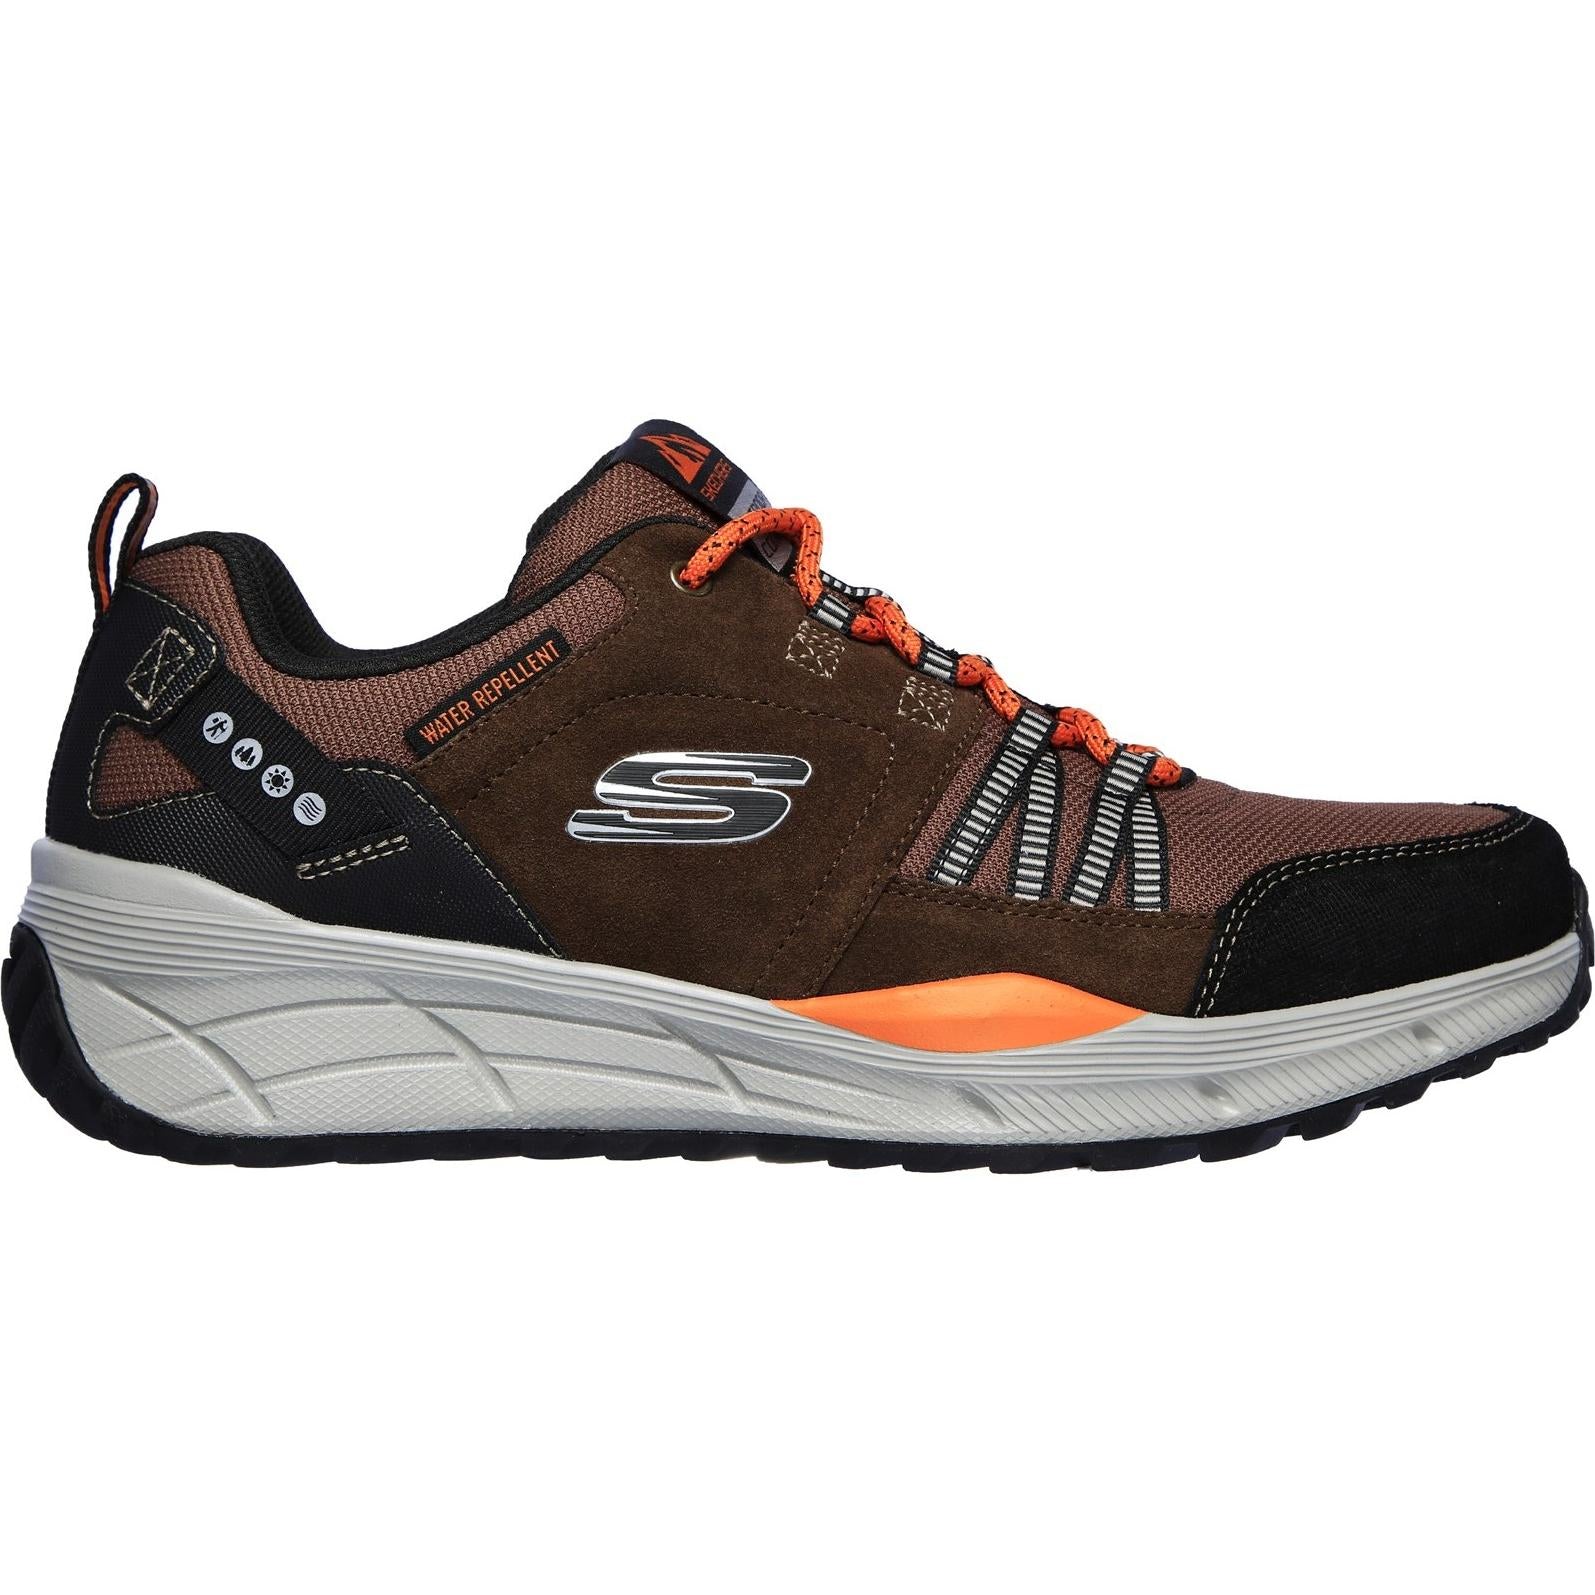 Skechers Equalizer 4.0 Trail Sports Shoes